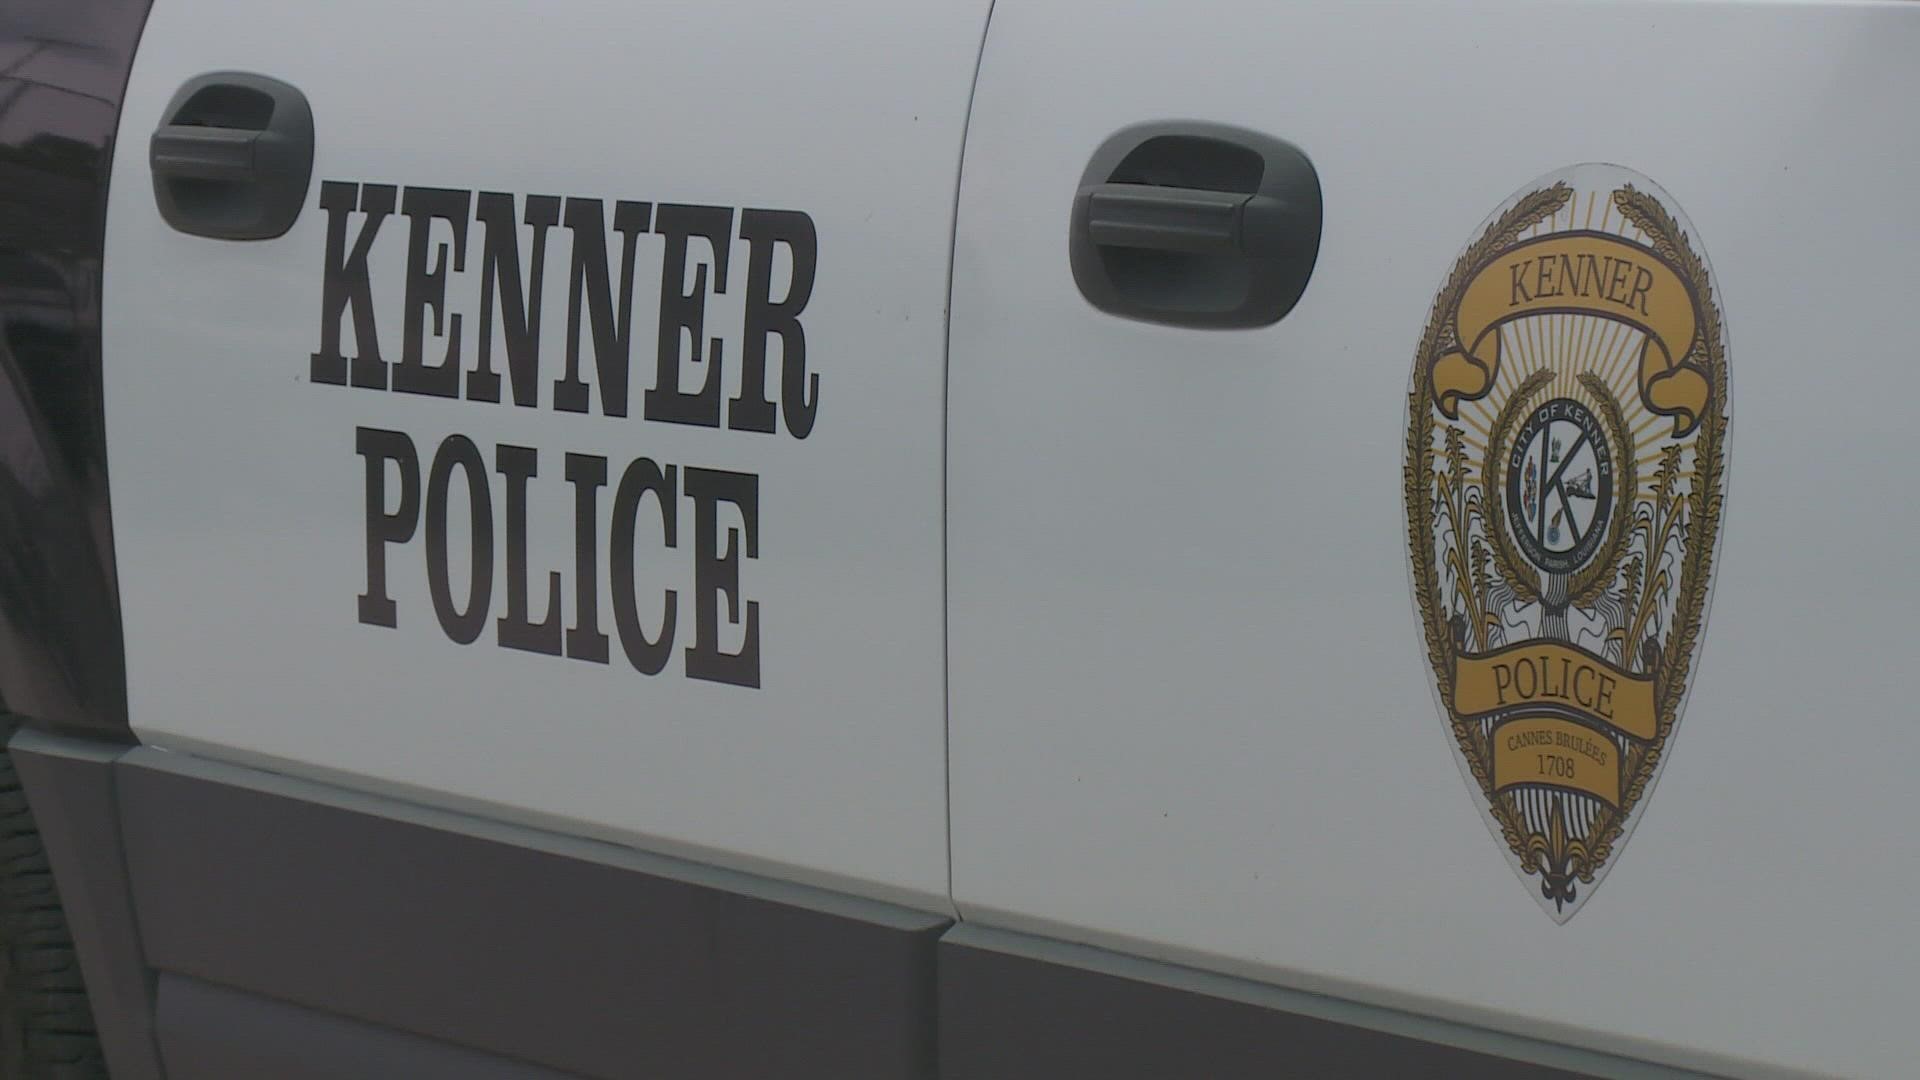 Three Kenner police officers were shot during a standoff with a suspect